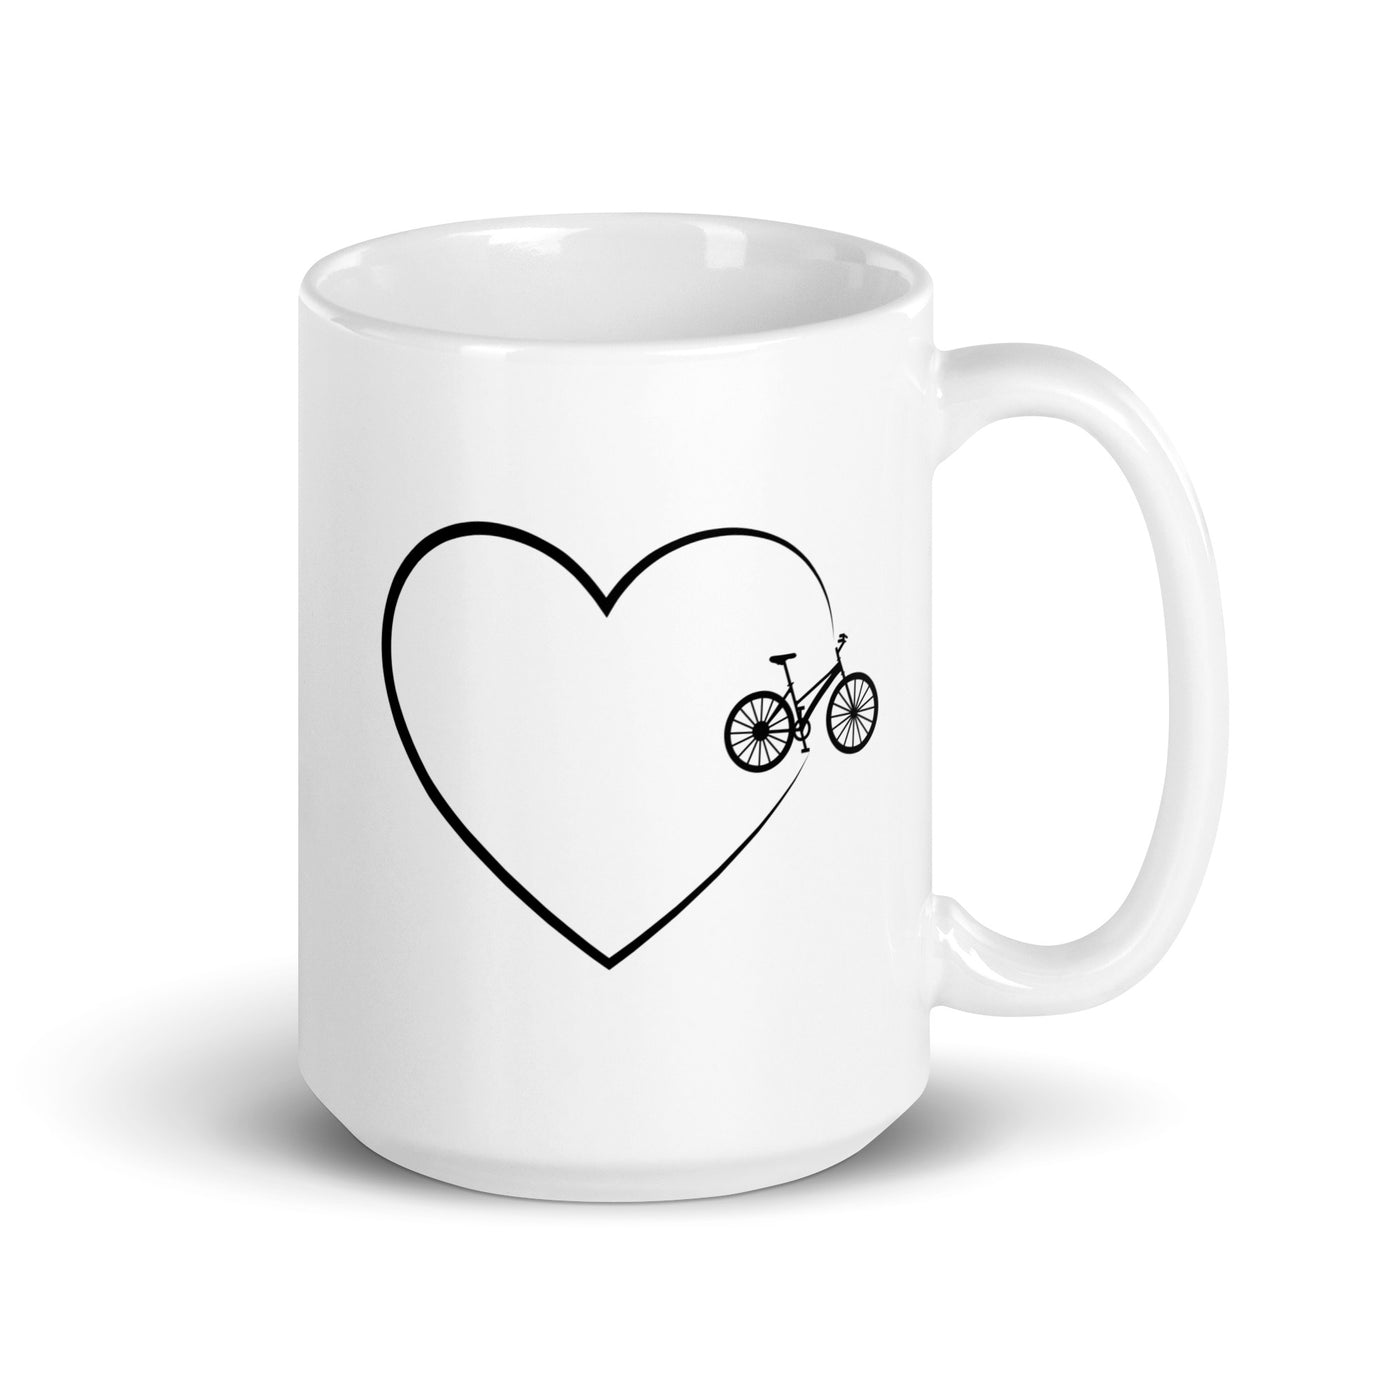 Heart 2 And Bicycle - Tasse fahrrad 15oz